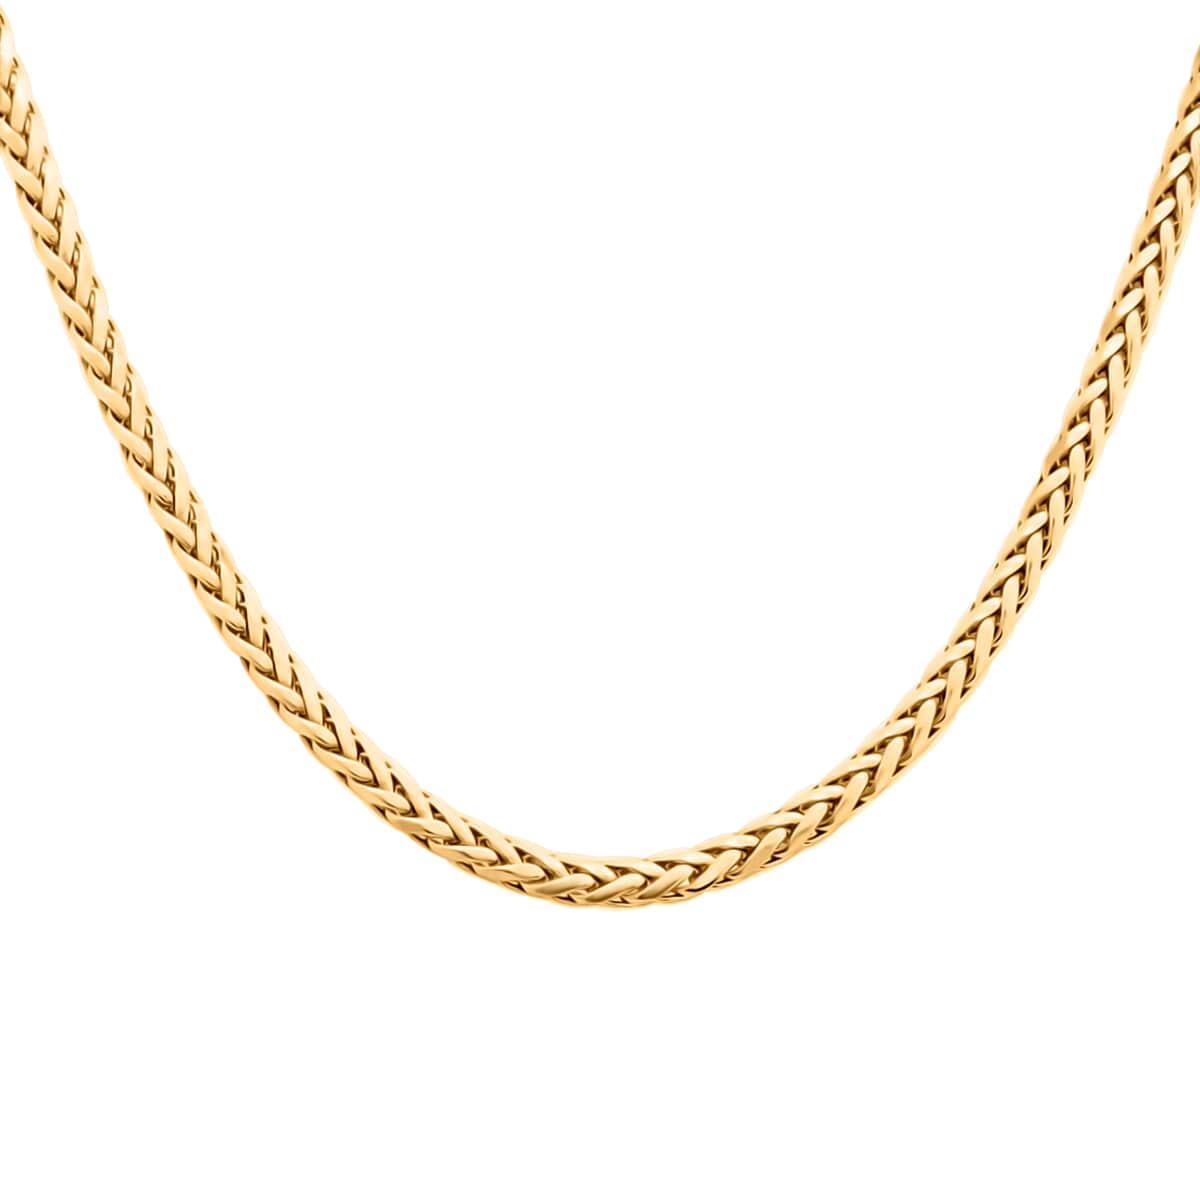 Buy 10K Yellow Gold 3mm Palma Chain Necklace 18 Inches 7.70 Grams at ...